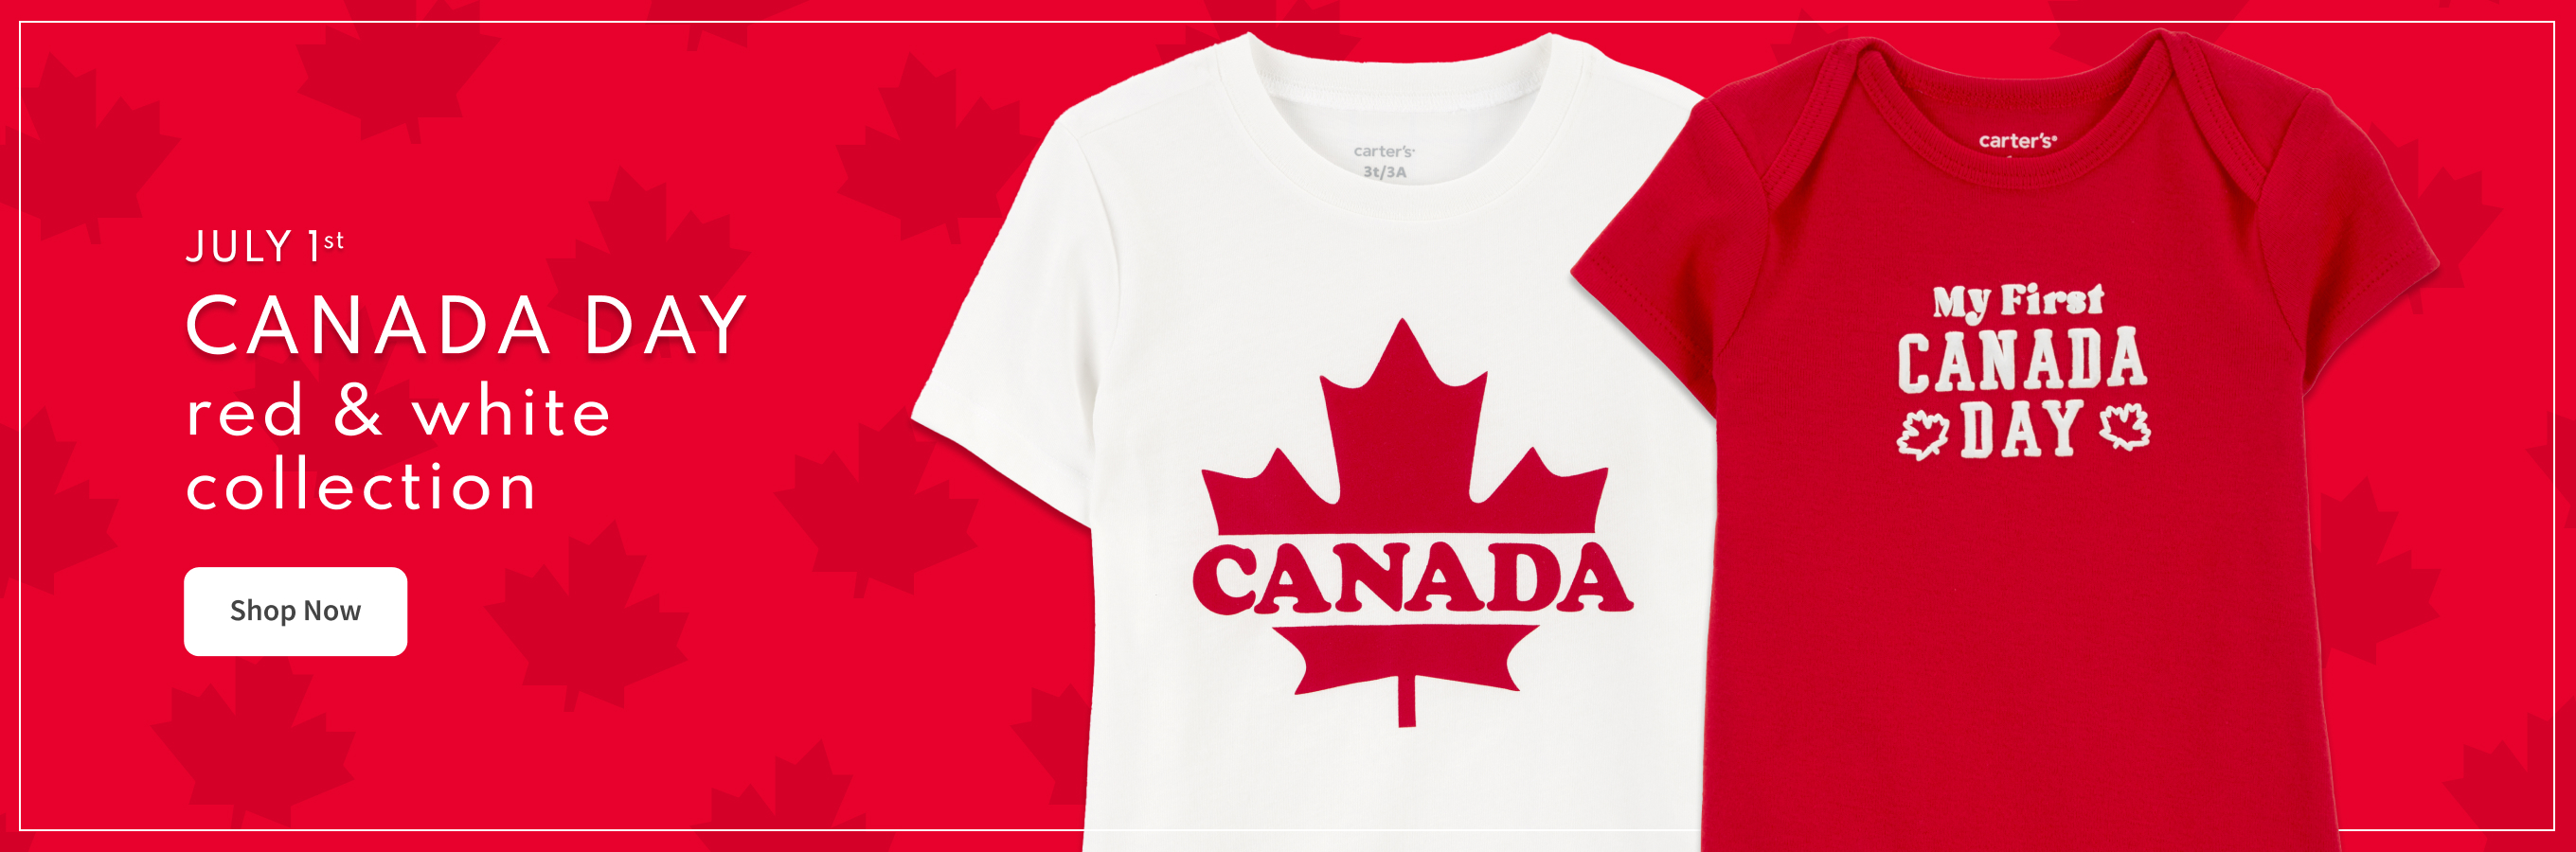 JULY 1st | CANADA DAY red & white collection | Shop Now | CANADA | My First CANADA DAY